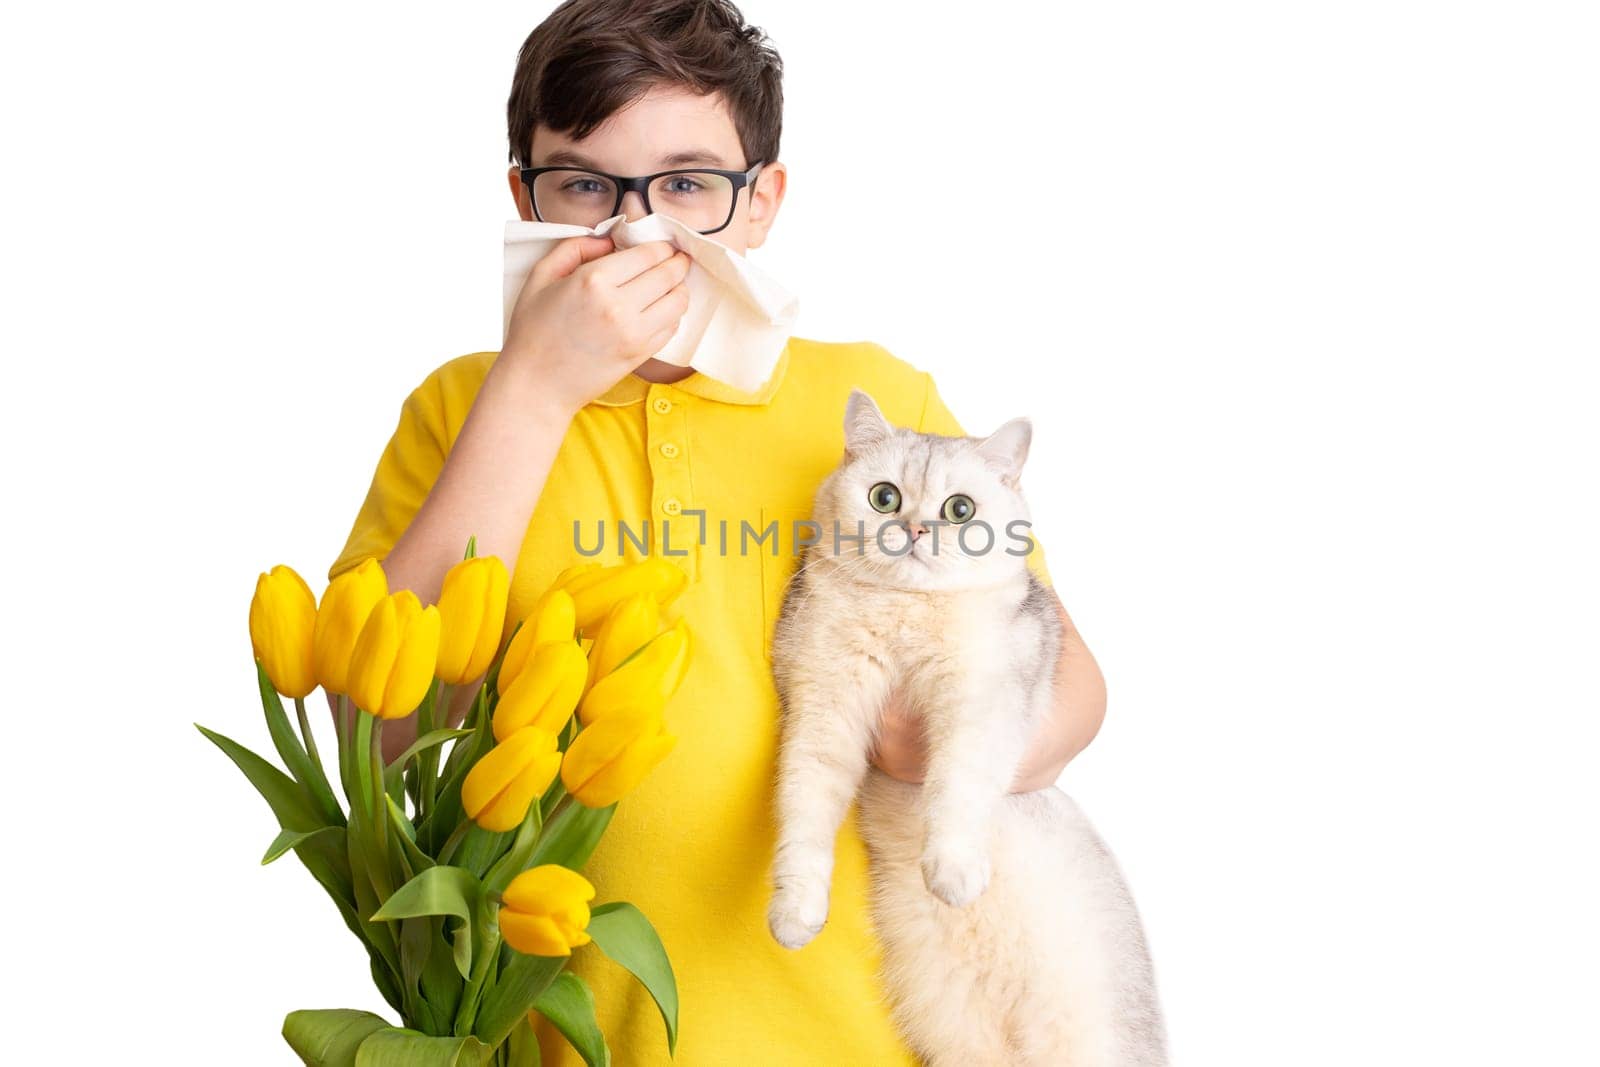 a boy with glasses, dressed in a yellow T-shirt, holds a white cat and covered his nose with a paper napkin and sneezes, look at camera, a bouquet of yellow tulips stands next to it, on a white background. To close up.